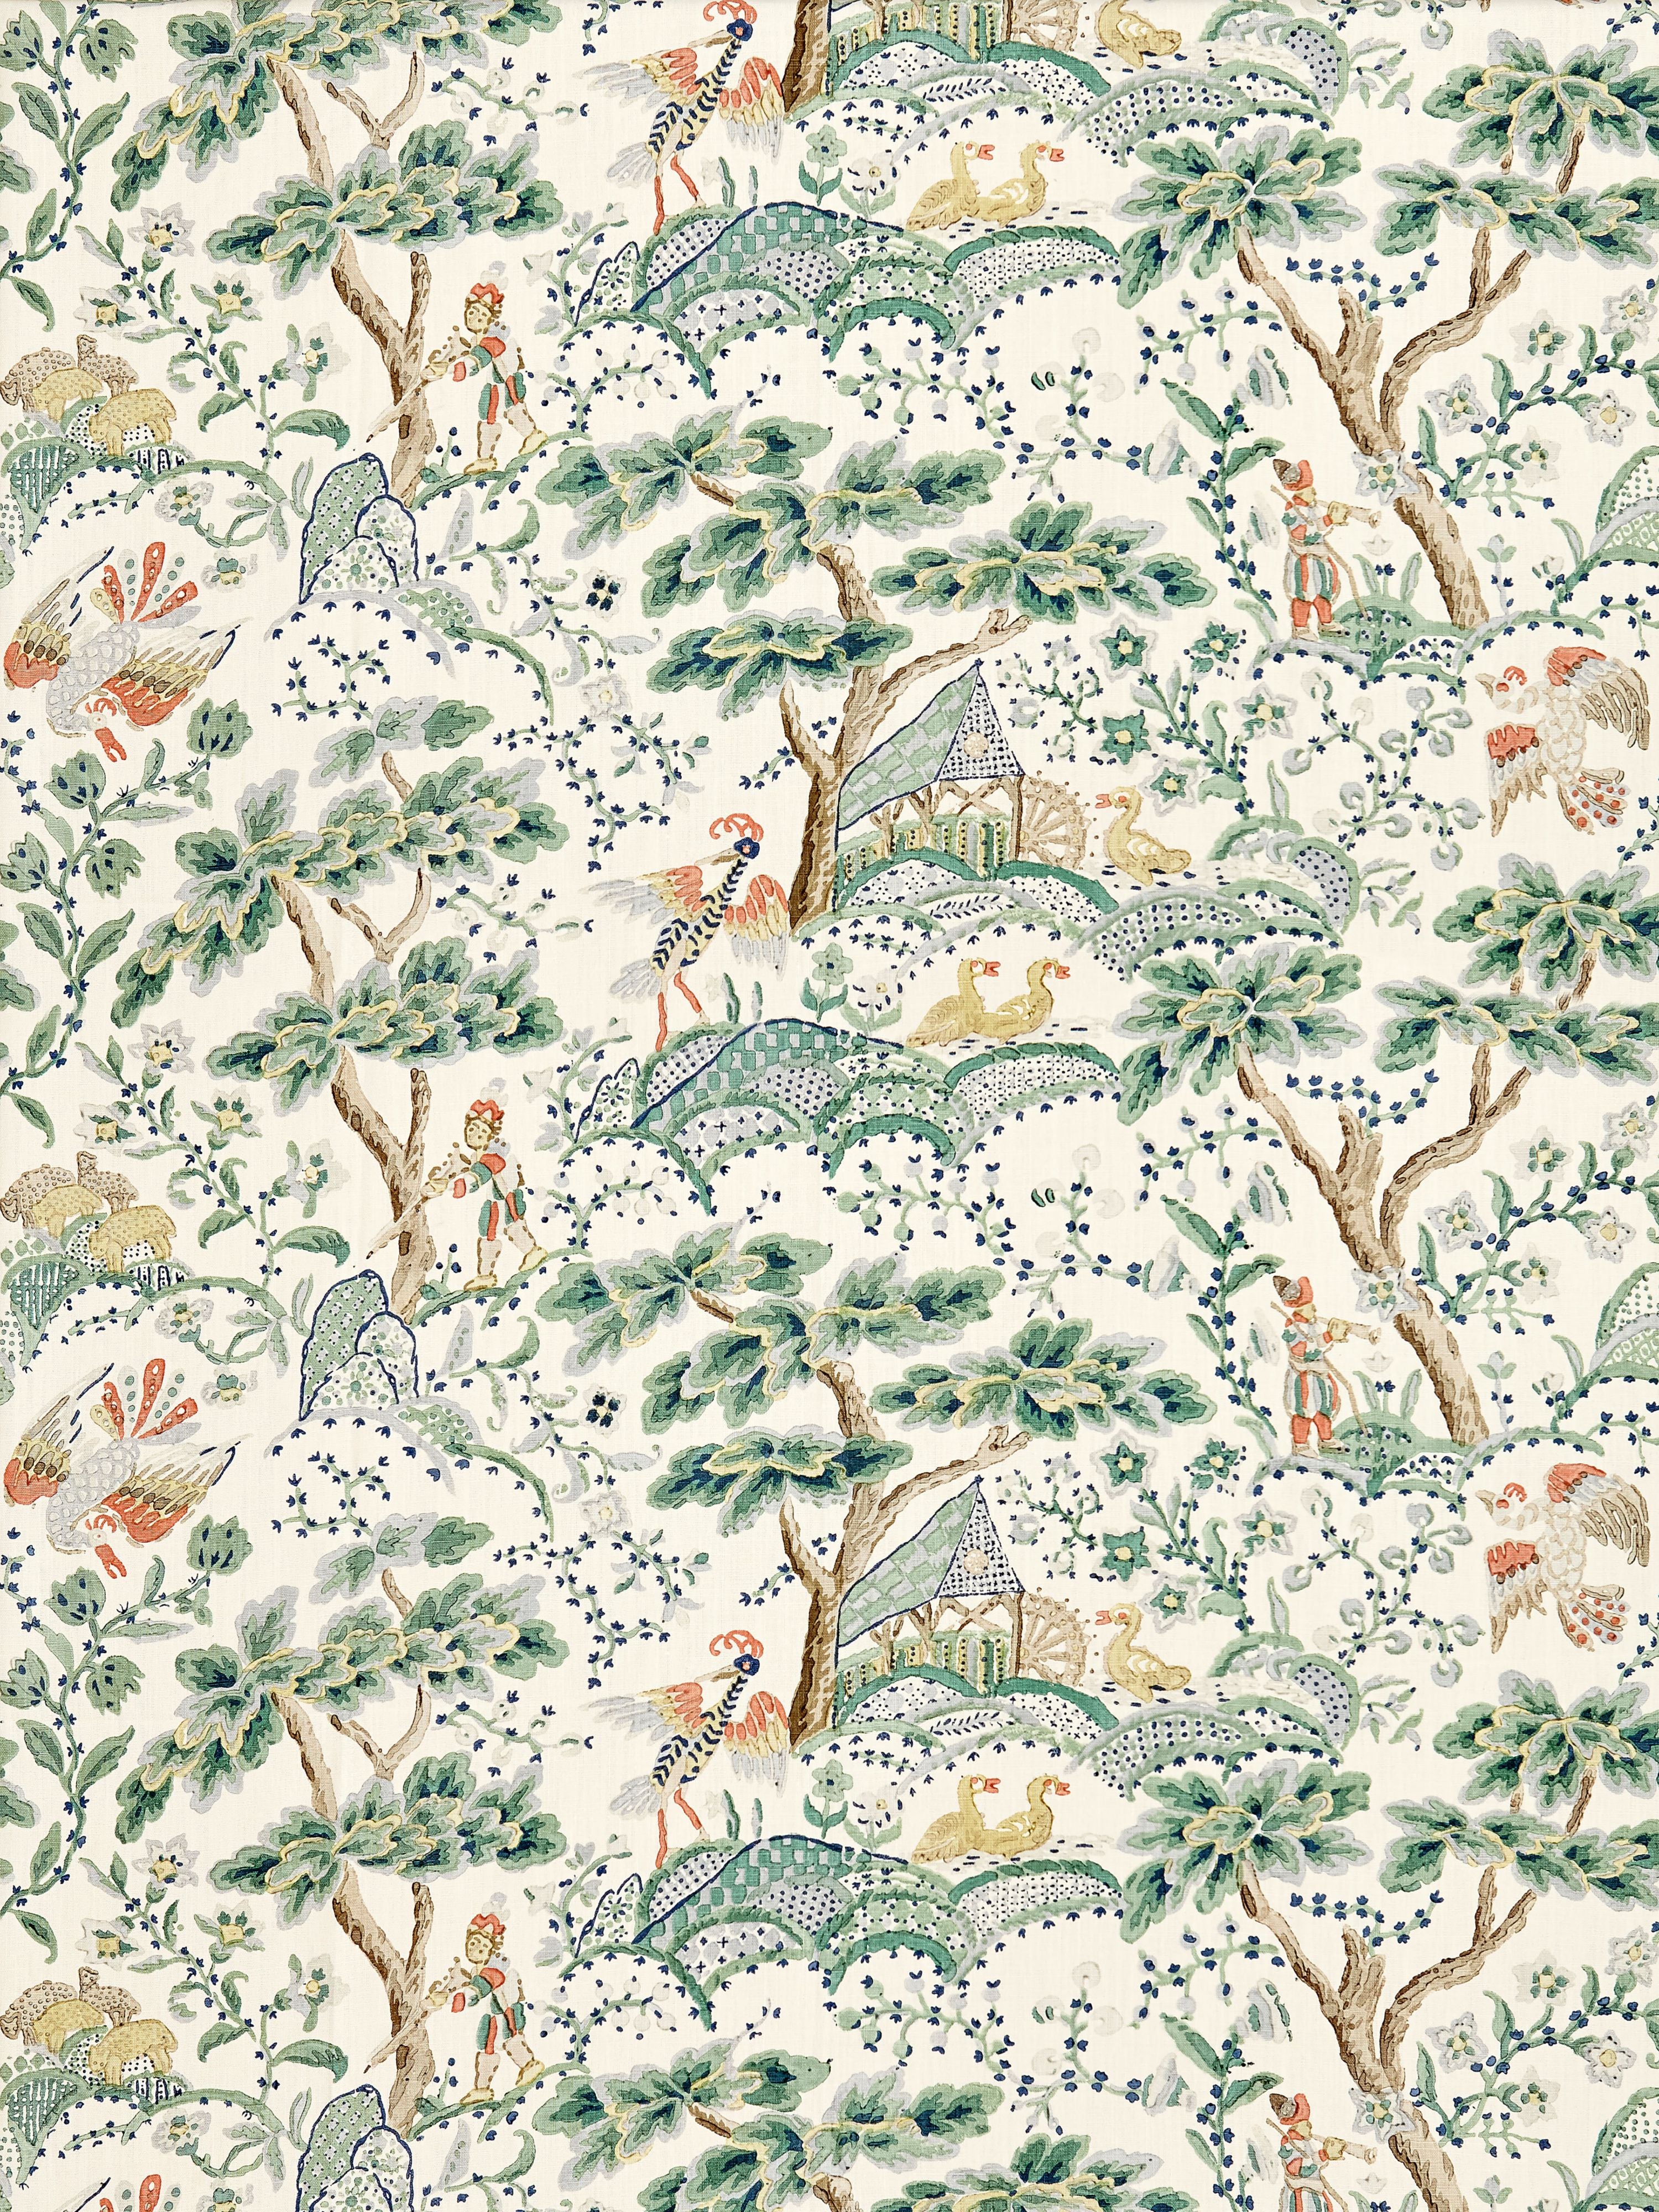 Kelmescott Hand Block Print fabric in leaf on ivory color - pattern number SC 000216590 - by Scalamandre in the Scalamandre Fabrics Book 1 collection